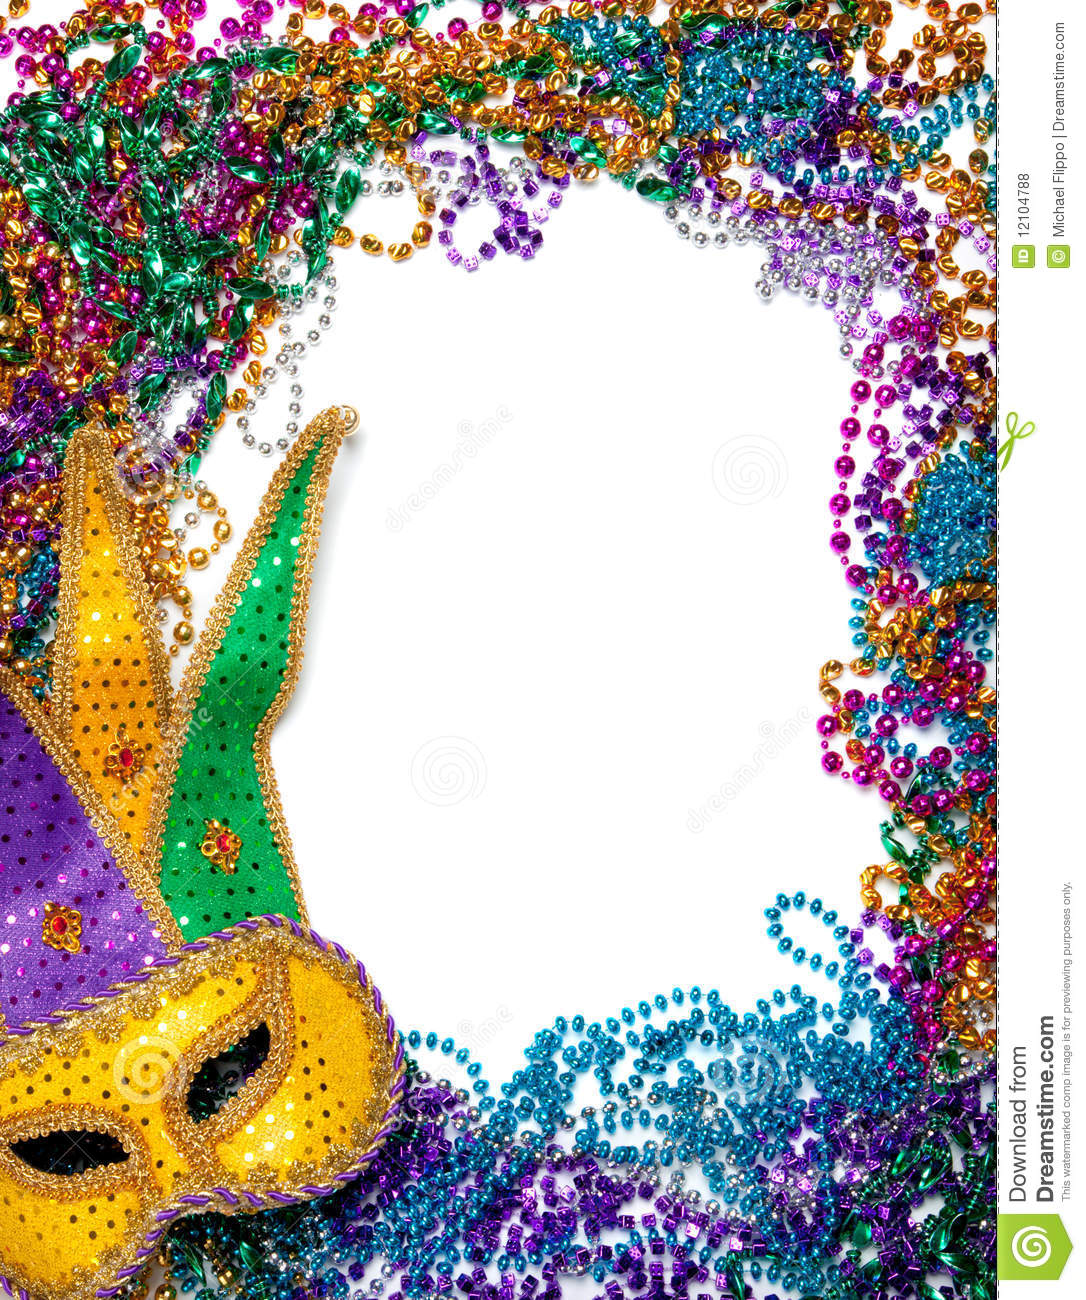 Border Made Of Mardi Gras Bead And Mask On White Royalty Free Stock    